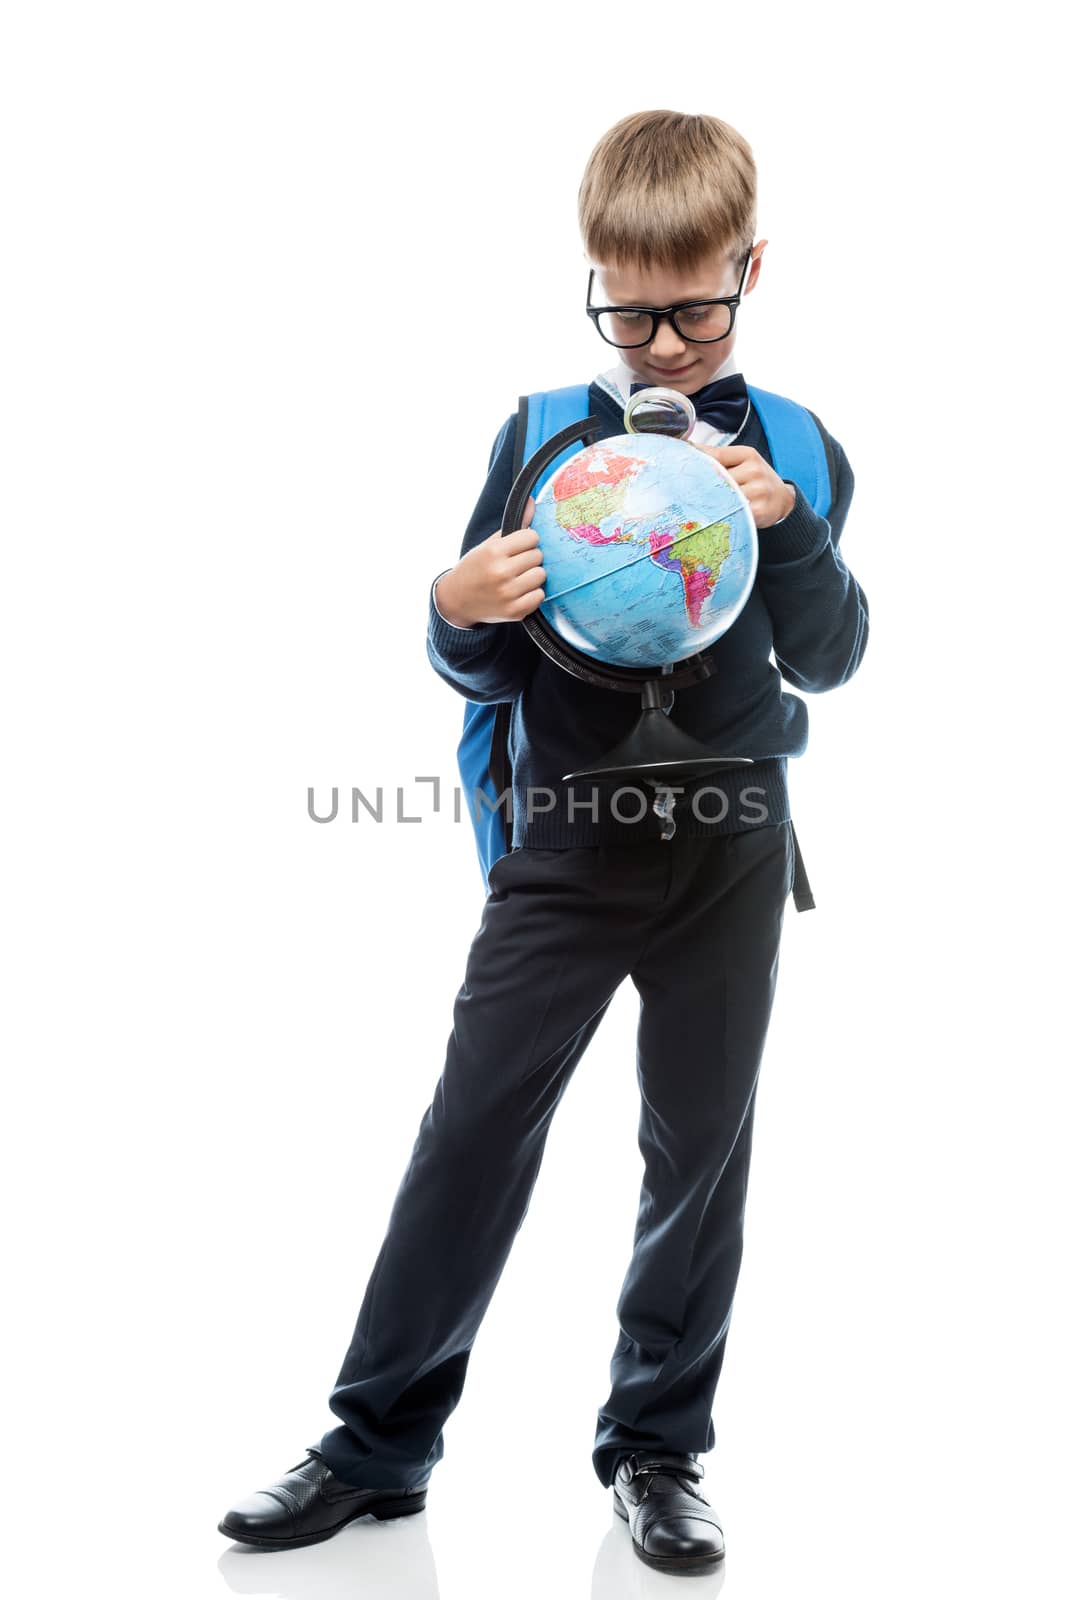 schoolboy examines through magnifier glass globe, portrait is is by kosmsos111